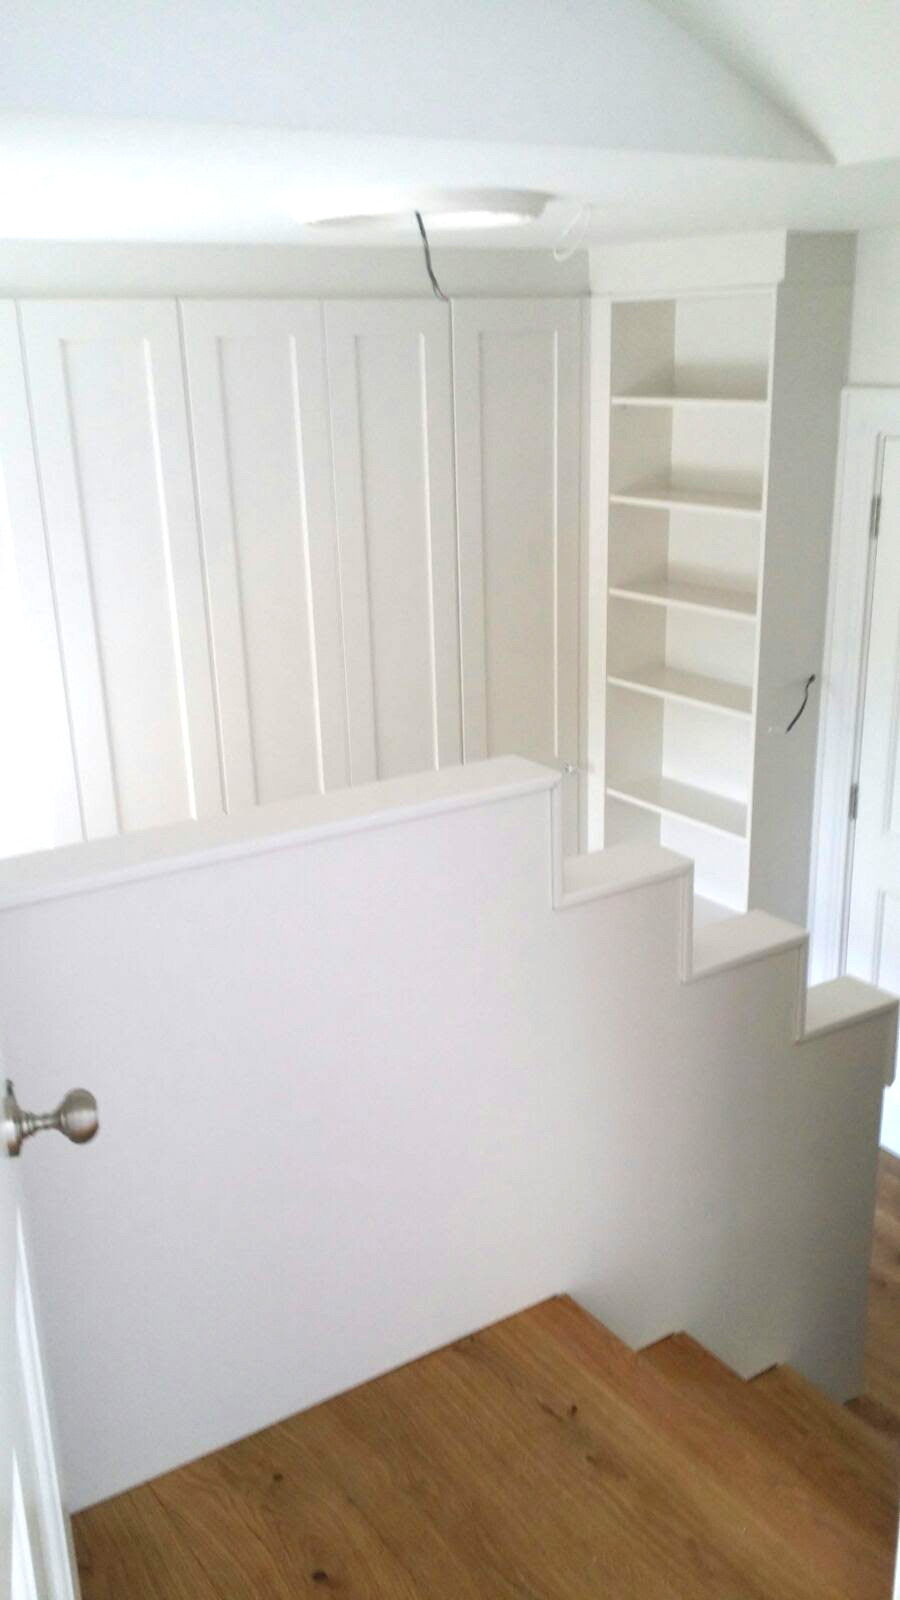 You are currently viewing Stepped Shelving in Walk-In Wardrobe